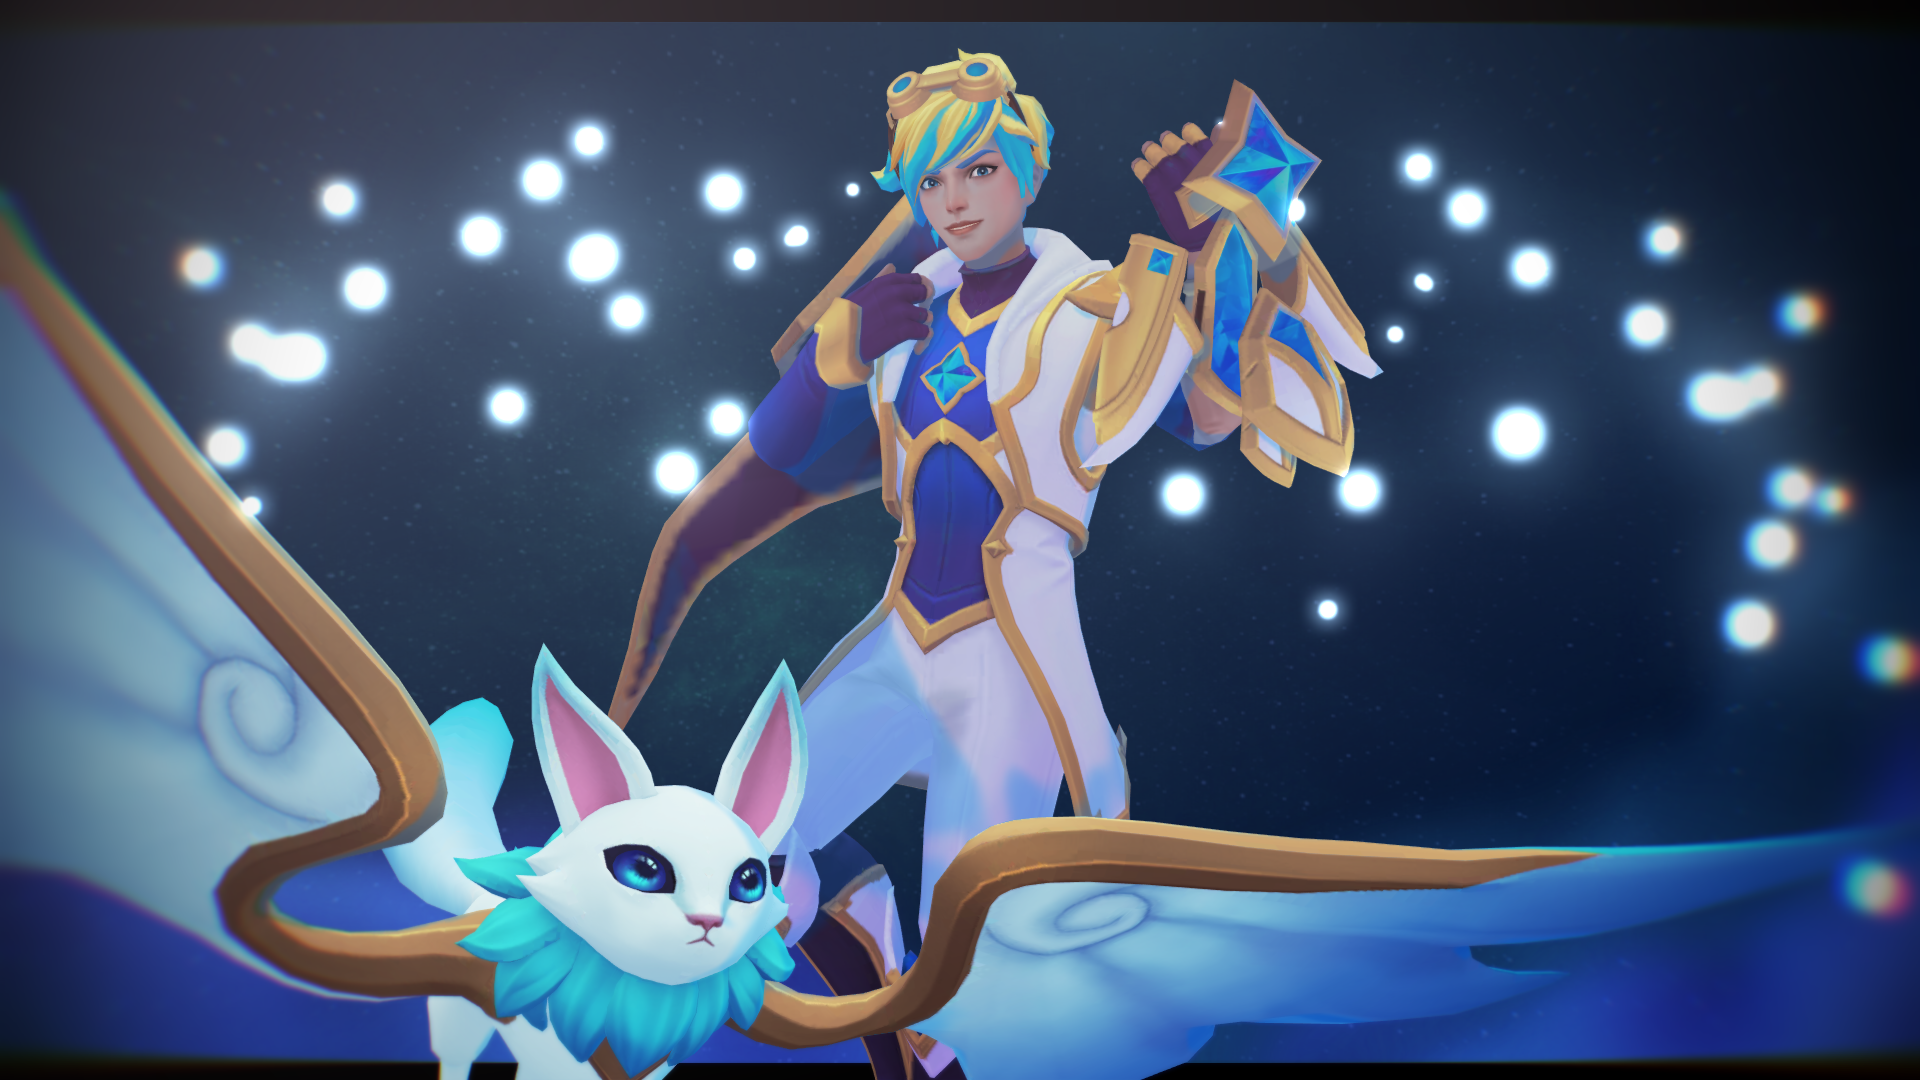 Star Guardian Ezreal Voice Pack